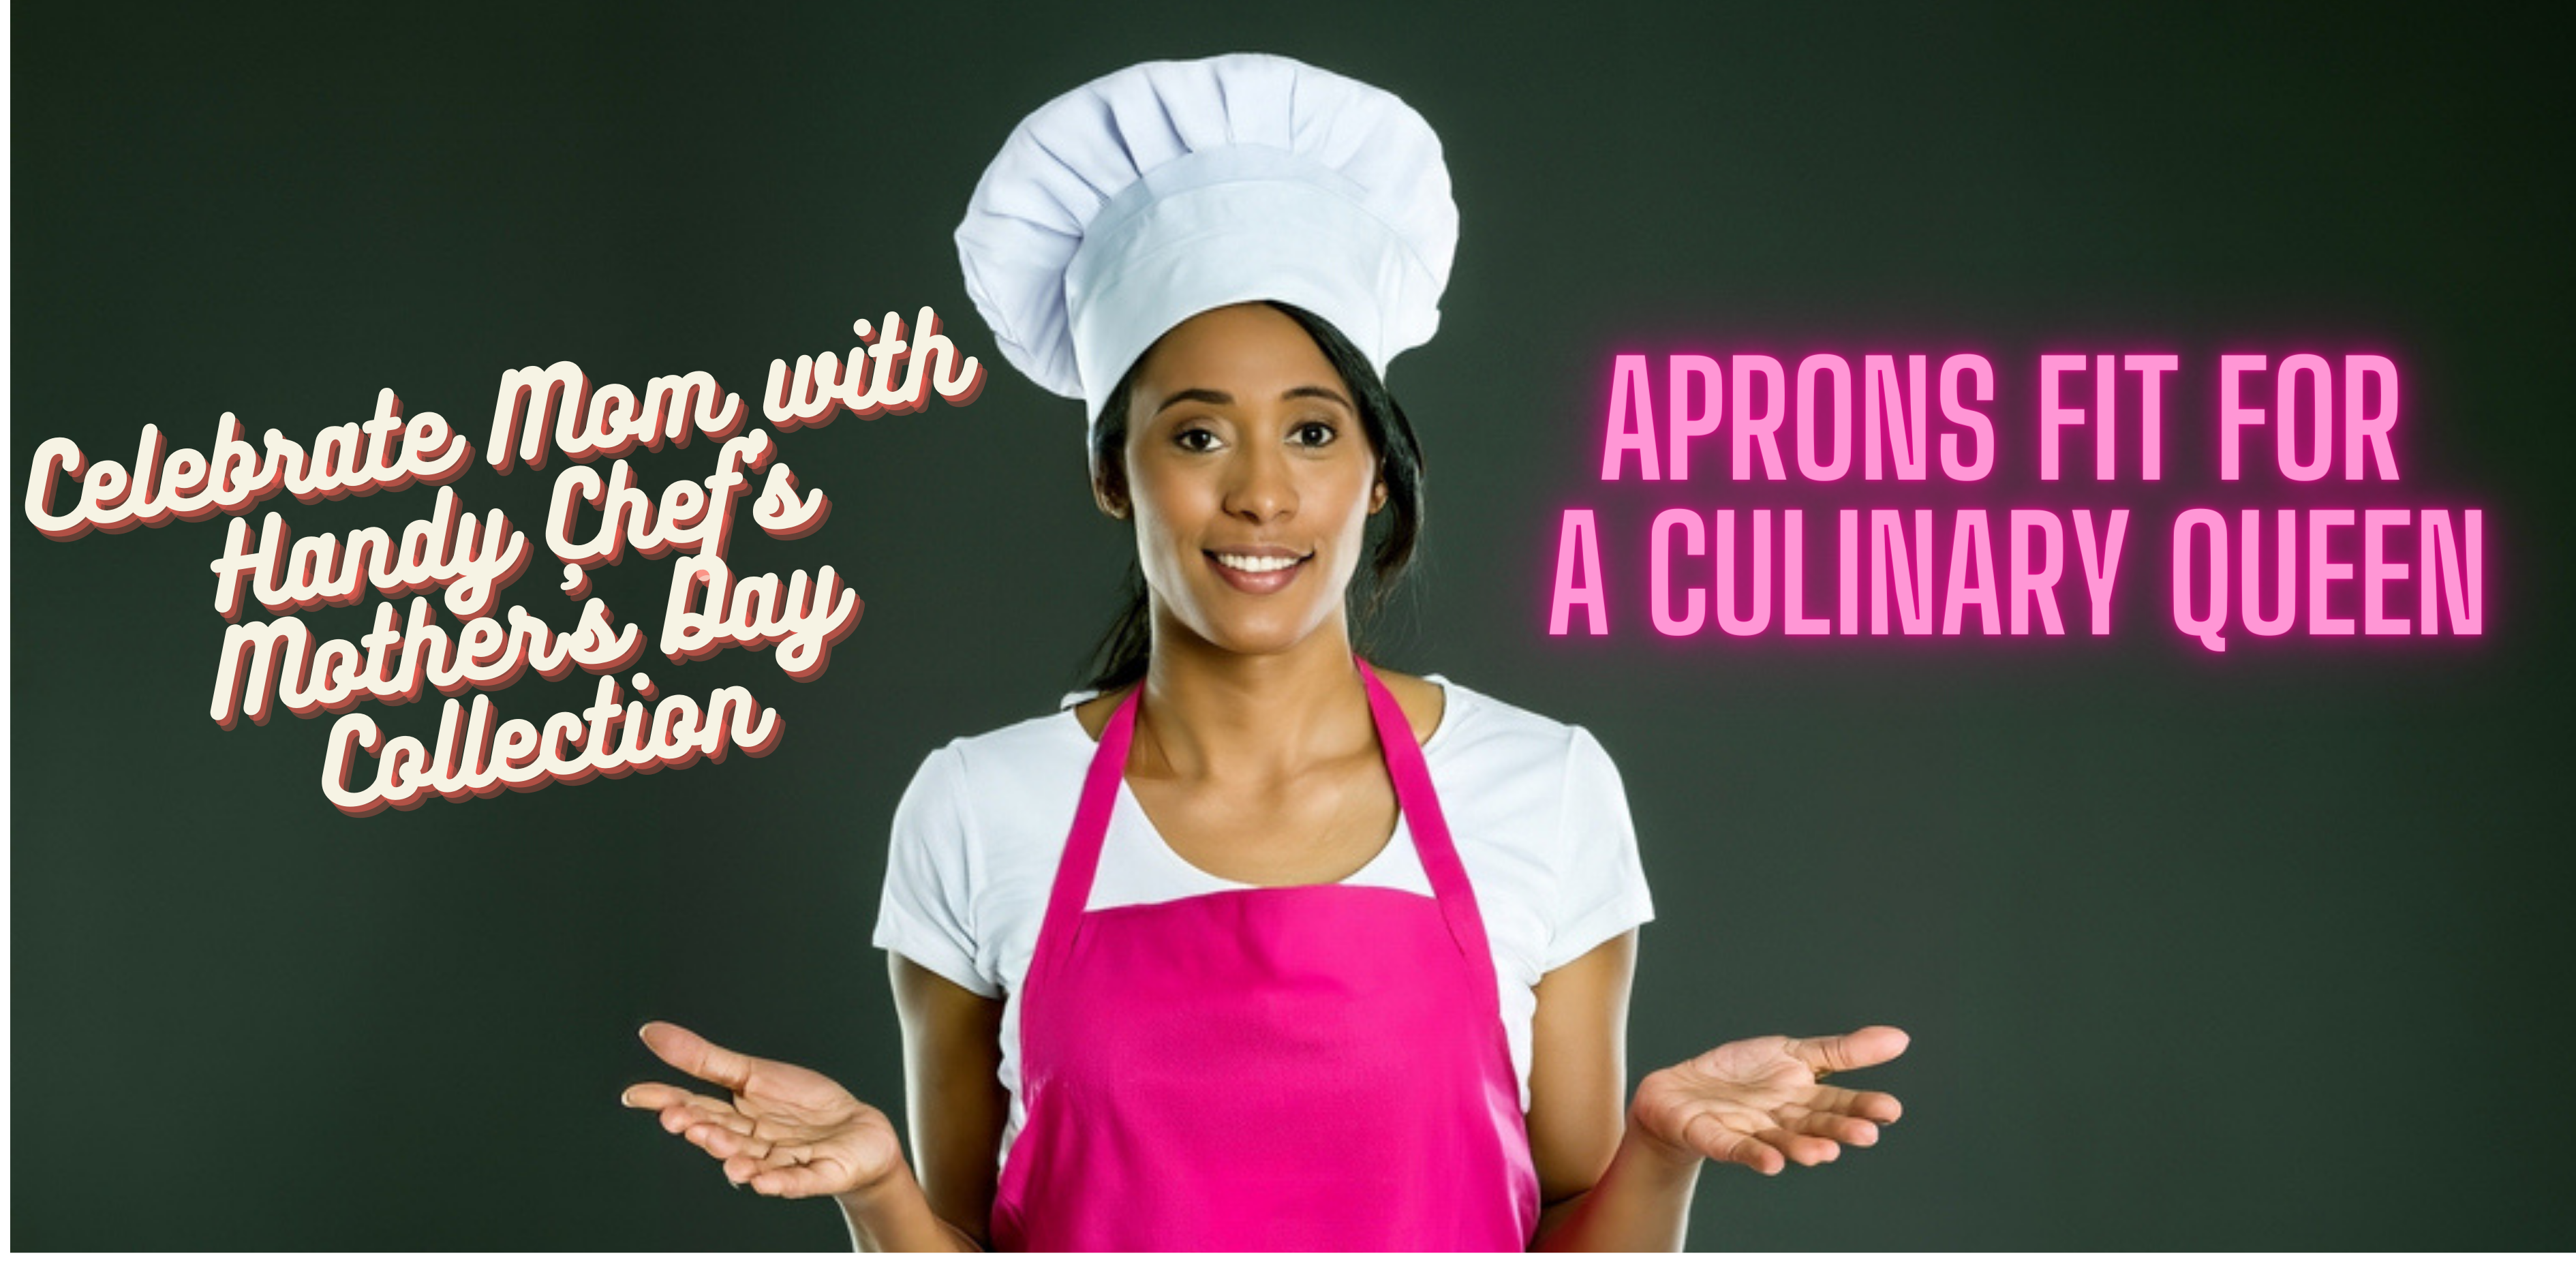 Celebrate Mom in style with Handy Chef's Mother's Day Aprons Collection